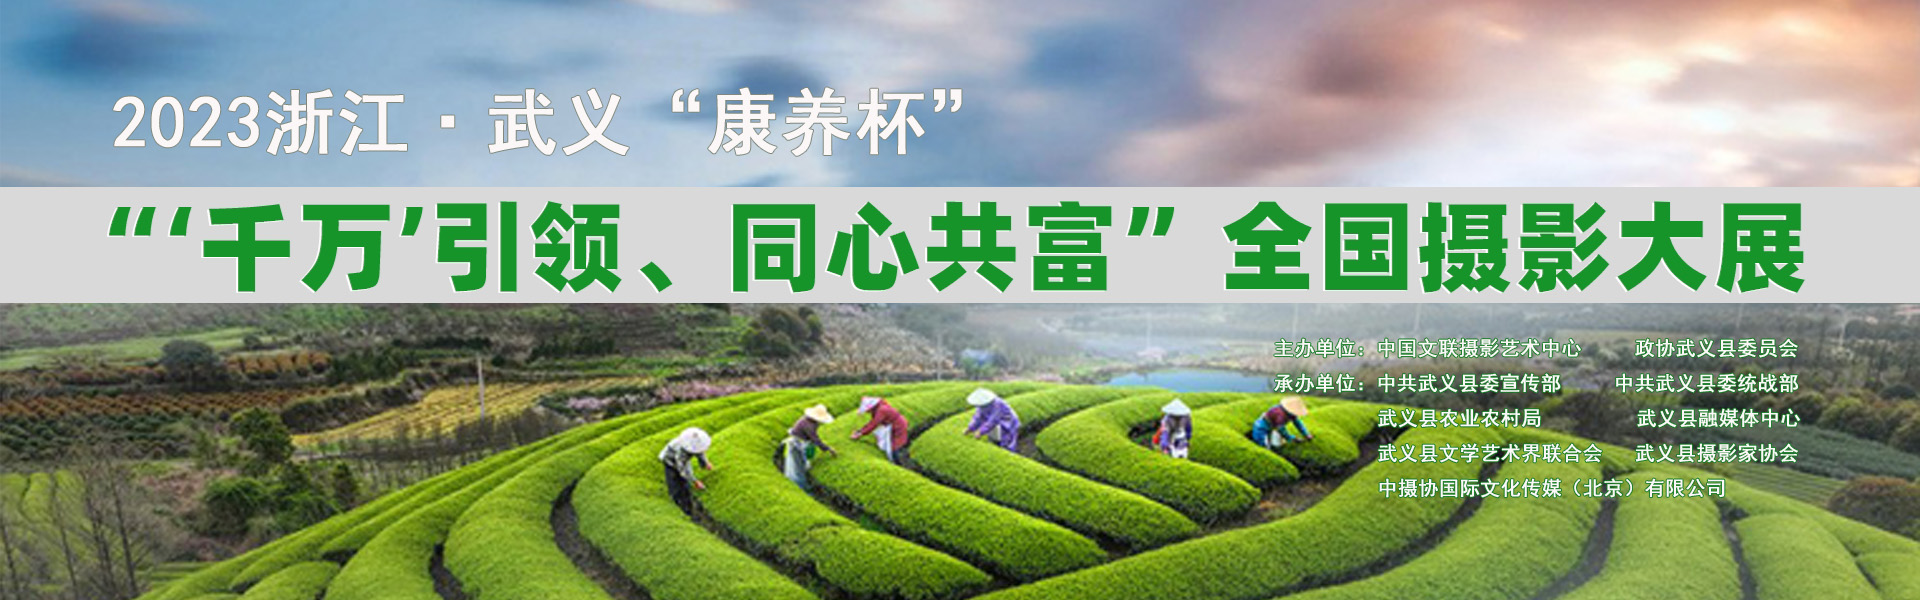  2023 Zhejiang Wuyi National Photography Exhibition of "Health Cup", "Ten Million" Leading, One Heart and Common Prosperity "